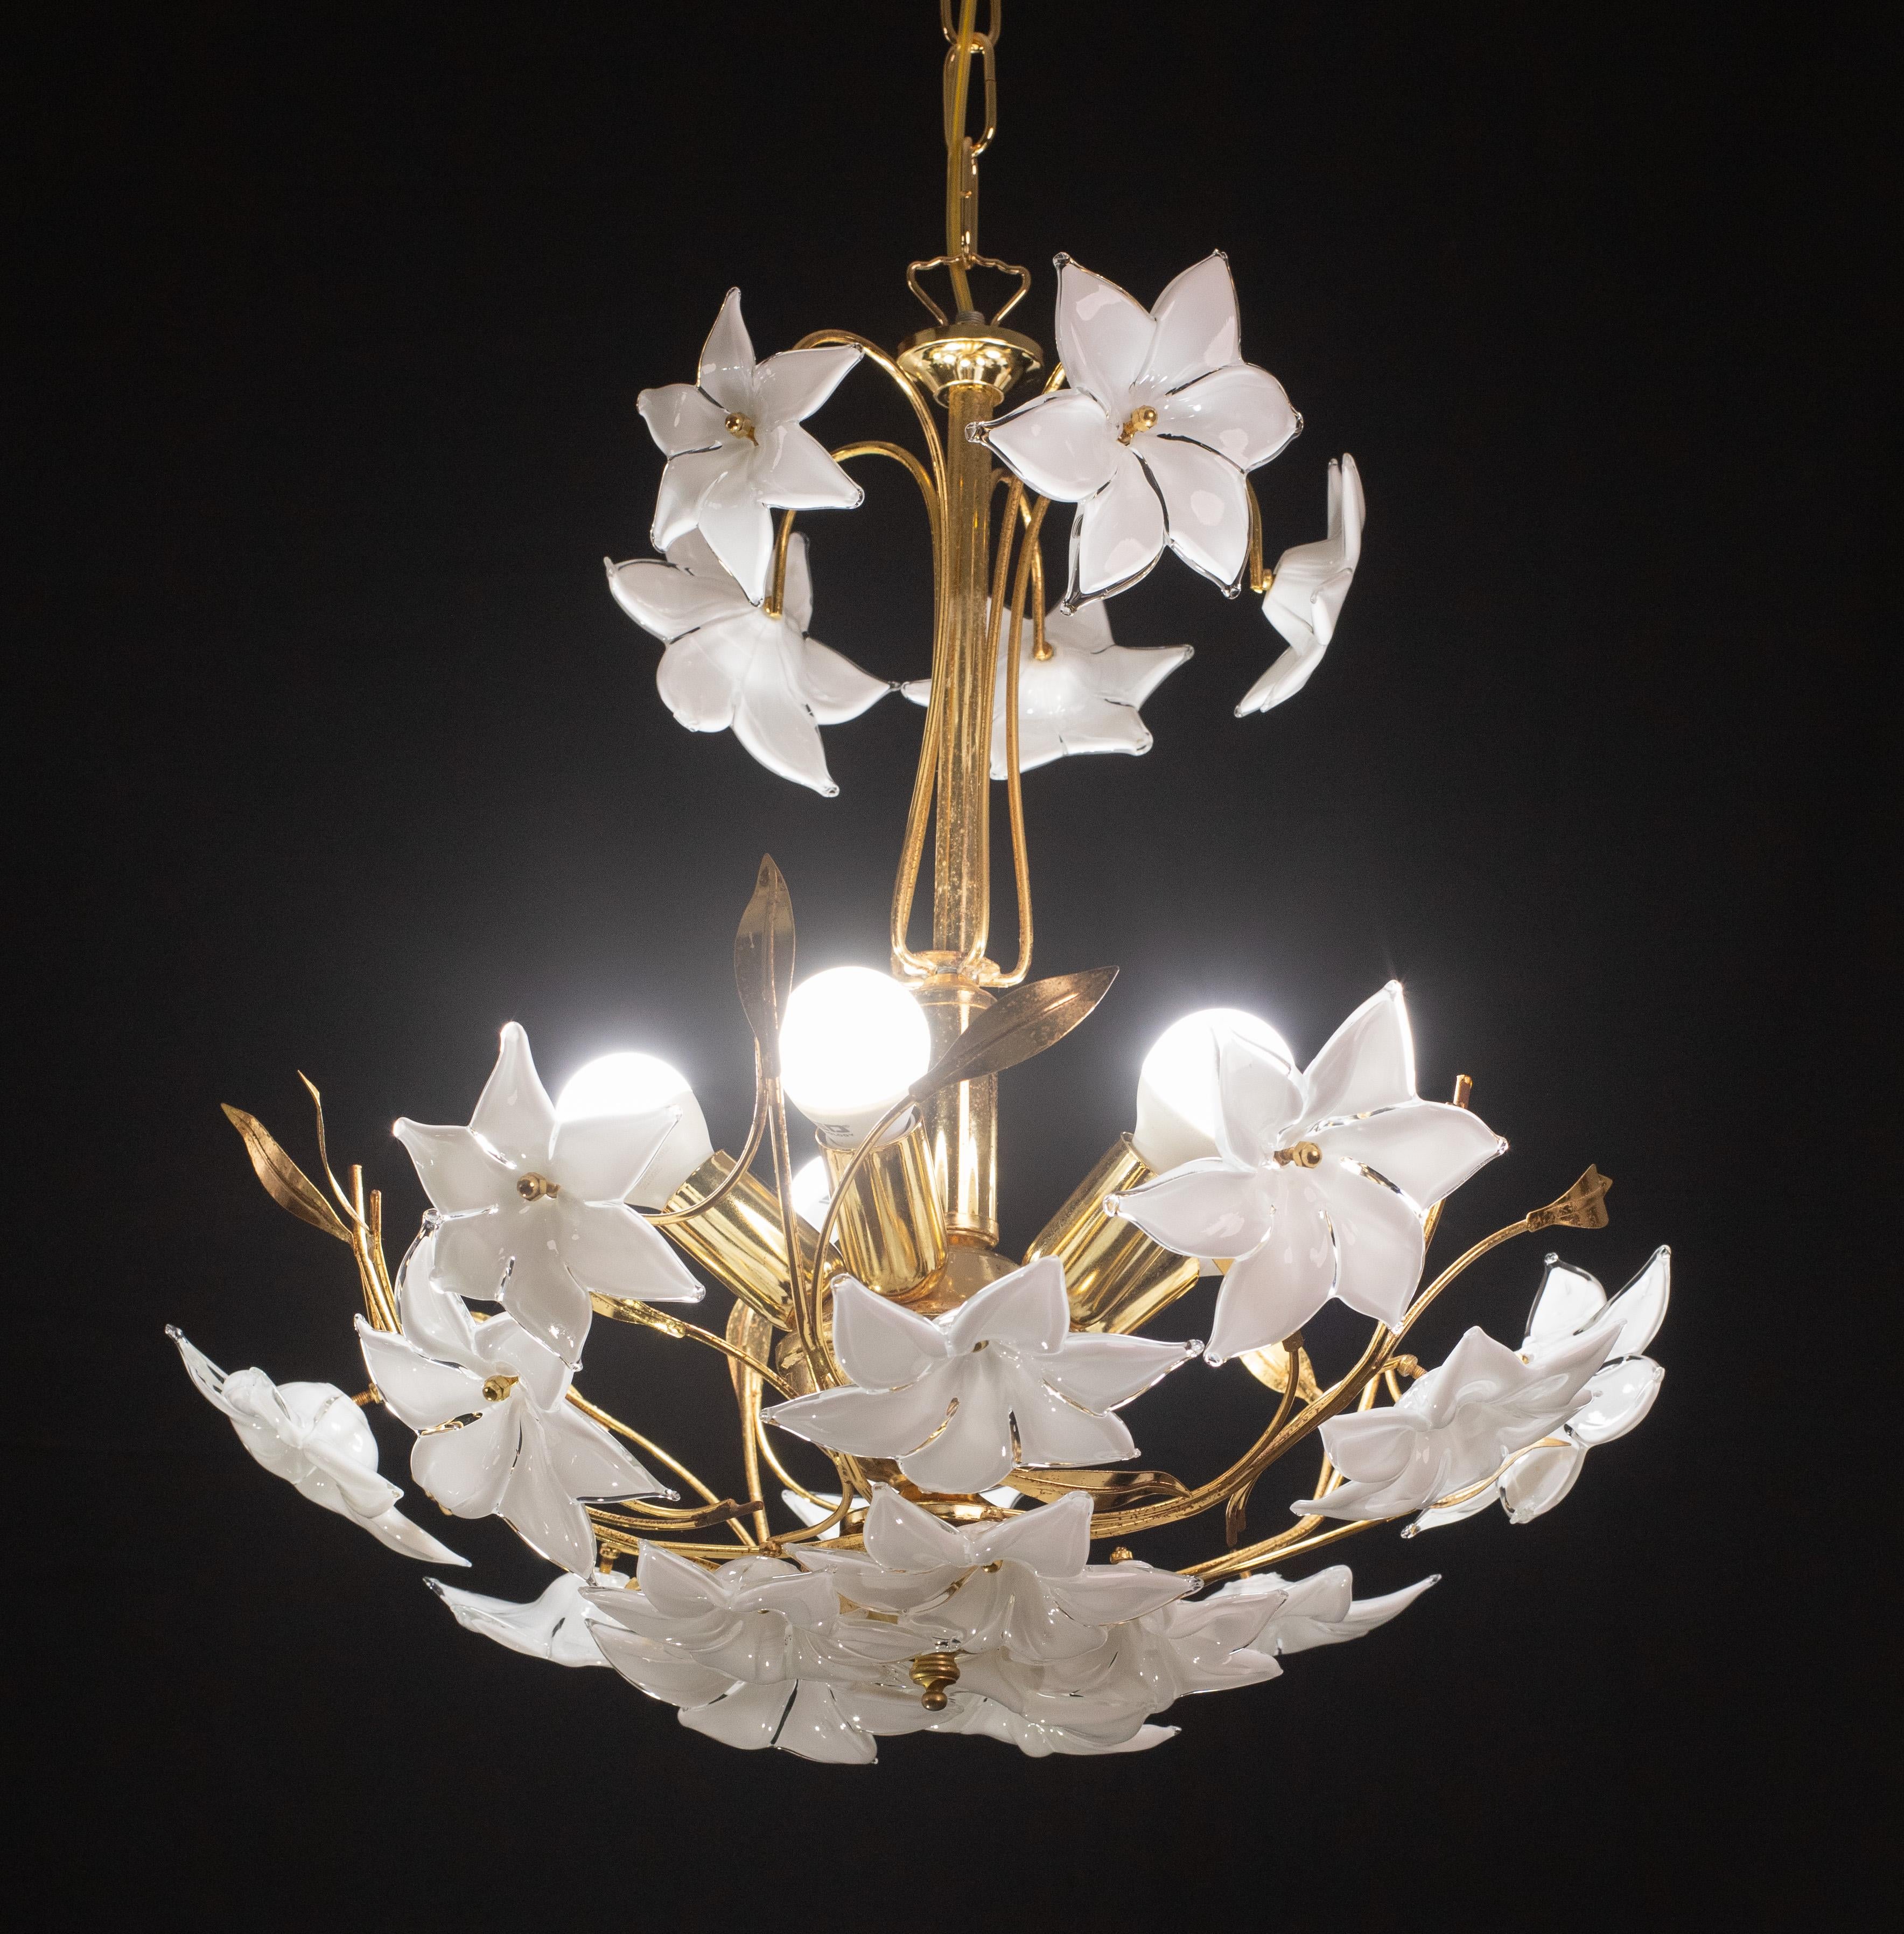 Vintage Murano glass chandelier of white flowers in murano glass.
The chandelier has 5 light points with E14 socket, possible to rewire for Usa standards.
The frame is made of gold bath, some signs of time, two leaves of the ones that make up the